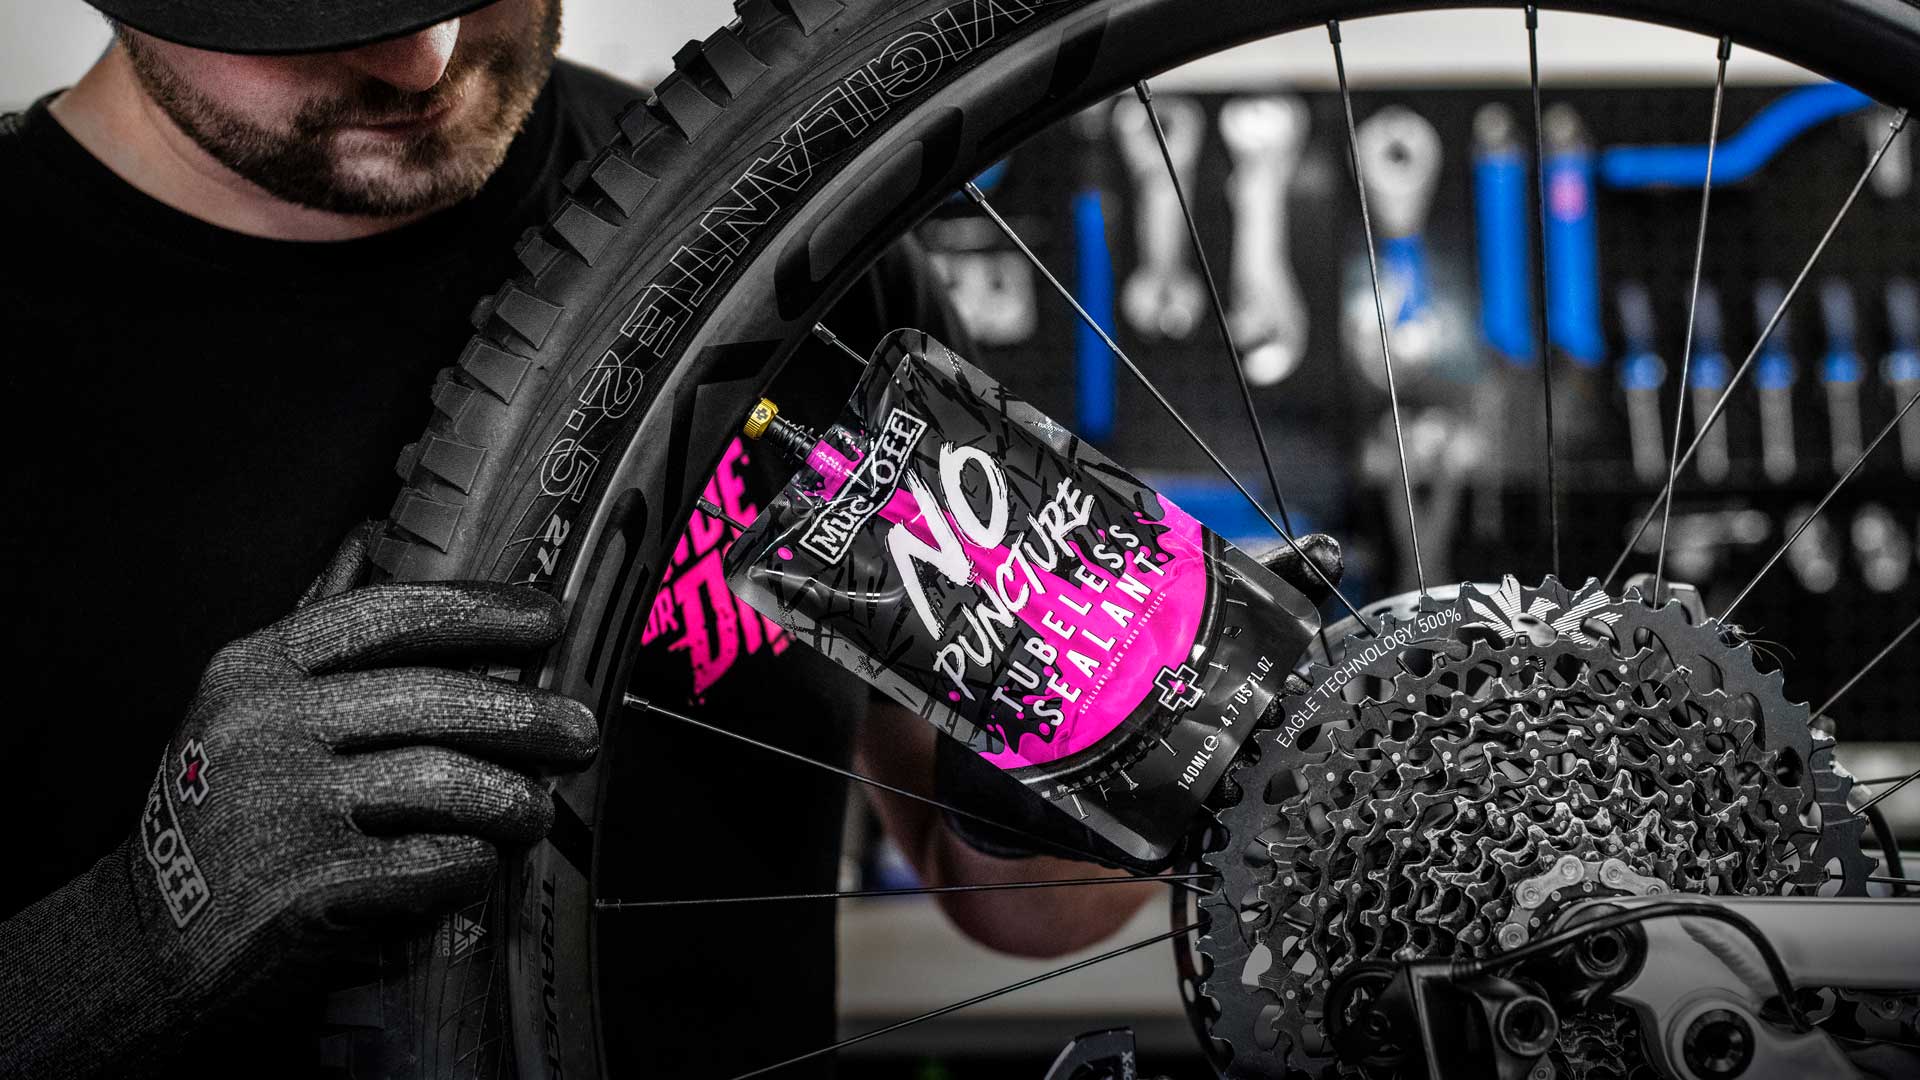 Muc-Off Tubeless Sealant 140ml Pouch